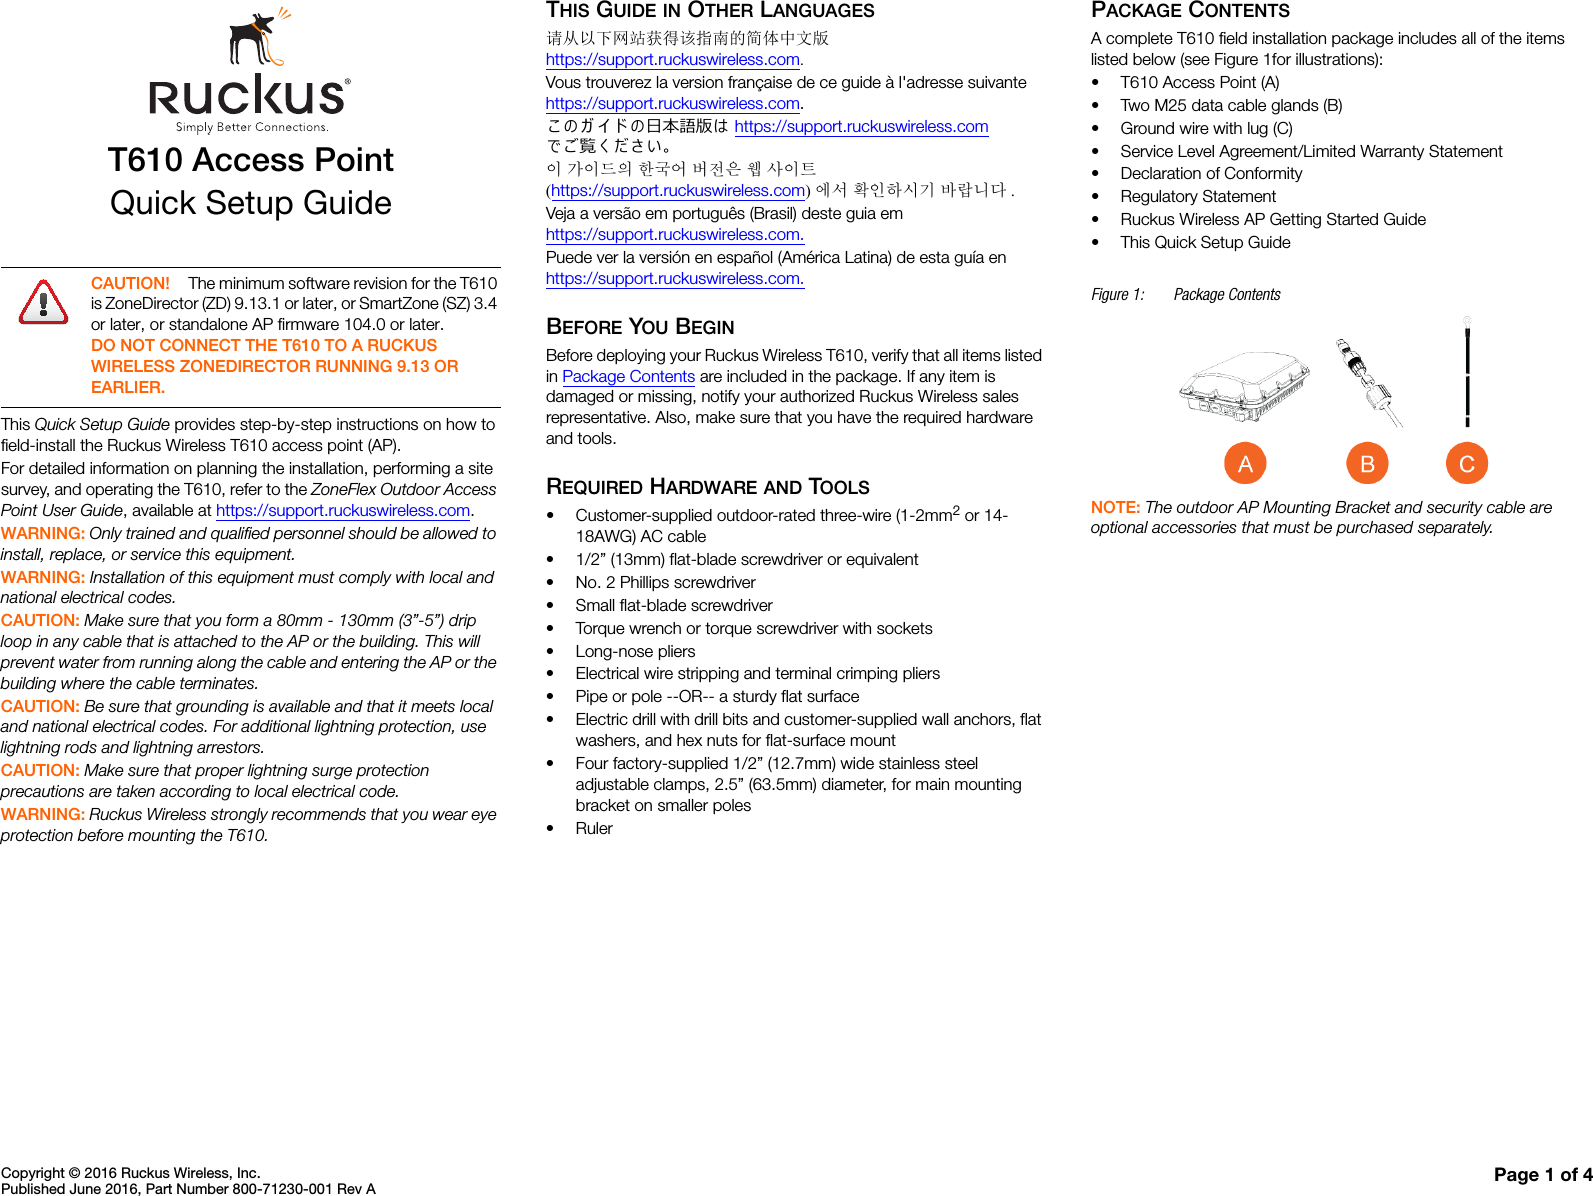 Copyright © 2016 Ruckus Wireless, Inc.Published June 2016, Part Number 800-71230-001 Rev A Page 1 of 4T610 Access PointQuick Setup GuideThis Quick Setup Guide provides step-by-step instructions on how to field-install the Ruckus Wireless T610 access point (AP).For detailed information on planning the installation, performing a site survey, and operating the T610, refer to the ZoneFlex Outdoor Access Point User Guide, available at https://support.ruckuswireless.com.WARNING: Only trained and qualified personnel should be allowed to install, replace, or service this equipment. WARNING: Installation of this equipment must comply with local and national electrical codes. CAUTION: Make sure that you form a 80mm - 130mm (3”-5”) drip loop in any cable that is attached to the AP or the building. This will prevent water from running along the cable and entering the AP or the building where the cable terminates. CAUTION: Be sure that grounding is available and that it meets local and national electrical codes. For additional lightning protection, use lightning rods and lightning arrestors. CAUTION: Make sure that proper lightning surge protection precautions are taken according to local electrical code. WARNING: Ruckus Wireless strongly recommends that you wear eye protection before mounting the T610.THIS GUIDE IN OTHER LANGUAGES请从以下网站获得该指南的简体中文版 https://support.ruckuswireless.com.Vous trouverez la version française de ce guide à l&apos;adresse suivante https://support.ruckuswireless.com.こ の ガ イ ド の⽇本語版は https://support.ruckuswireless.com でご覧く ださい。이 가이드의 한국어 버전은 웹 사이트(https://support.ruckuswireless.com)에서 확인하시기 바랍니다 .Veja a versão em português (Brasil) deste guia em https://support.ruckuswireless.com.Puede ver la versión en español (América Latina) de esta guía en https://support.ruckuswireless.com.BEFORE YOU BEGINBefore deploying your Ruckus Wireless T610, verify that all items listed in Package Contents are included in the package. If any item is damaged or missing, notify your authorized Ruckus Wireless sales representative. Also, make sure that you have the required hardware and tools. REQUIRED HARDWARE AND TOOLS• Customer-supplied outdoor-rated three-wire (1-2mm2 or 14-18AWG) AC cable• 1/2” (13mm) flat-blade screwdriver or equivalent• No. 2 Phillips screwdriver• Small flat-blade screwdriver• Torque wrench or torque screwdriver with sockets• Long-nose pliers• Electrical wire stripping and terminal crimping pliers• Pipe or pole --OR-- a sturdy flat surface• Electric drill with drill bits and customer-supplied wall anchors, flat washers, and hex nuts for flat-surface mount• Four factory-supplied 1/2” (12.7mm) wide stainless steel adjustable clamps, 2.5” (63.5mm) diameter, for main mounting bracket on smaller poles•RulerPACKAGE CONTENTSA complete T610 field installation package includes all of the items listed below (see Figure 1for illustrations):• T610 Access Point (A)• Two M25 data cable glands (B)• Ground wire with lug (C)• Service Level Agreement/Limited Warranty Statement• Declaration of Conformity• Regulatory Statement• Ruckus Wireless AP Getting Started Guide• This Quick Setup GuideFigure 1: Package ContentsNOTE: The outdoor AP Mounting Bracket and security cable are optional accessories that must be purchased separately. CAUTION! The minimum software revision for the T610 is ZoneDirector (ZD) 9.13.1 or later, or SmartZone (SZ) 3.4 or later, or standalone AP firmware 104.0 or later.DO NOT CONNECT THE T610 TO A RUCKUS WIRELESS ZONEDIRECTOR RUNNING 9.13 OR EARLIER.